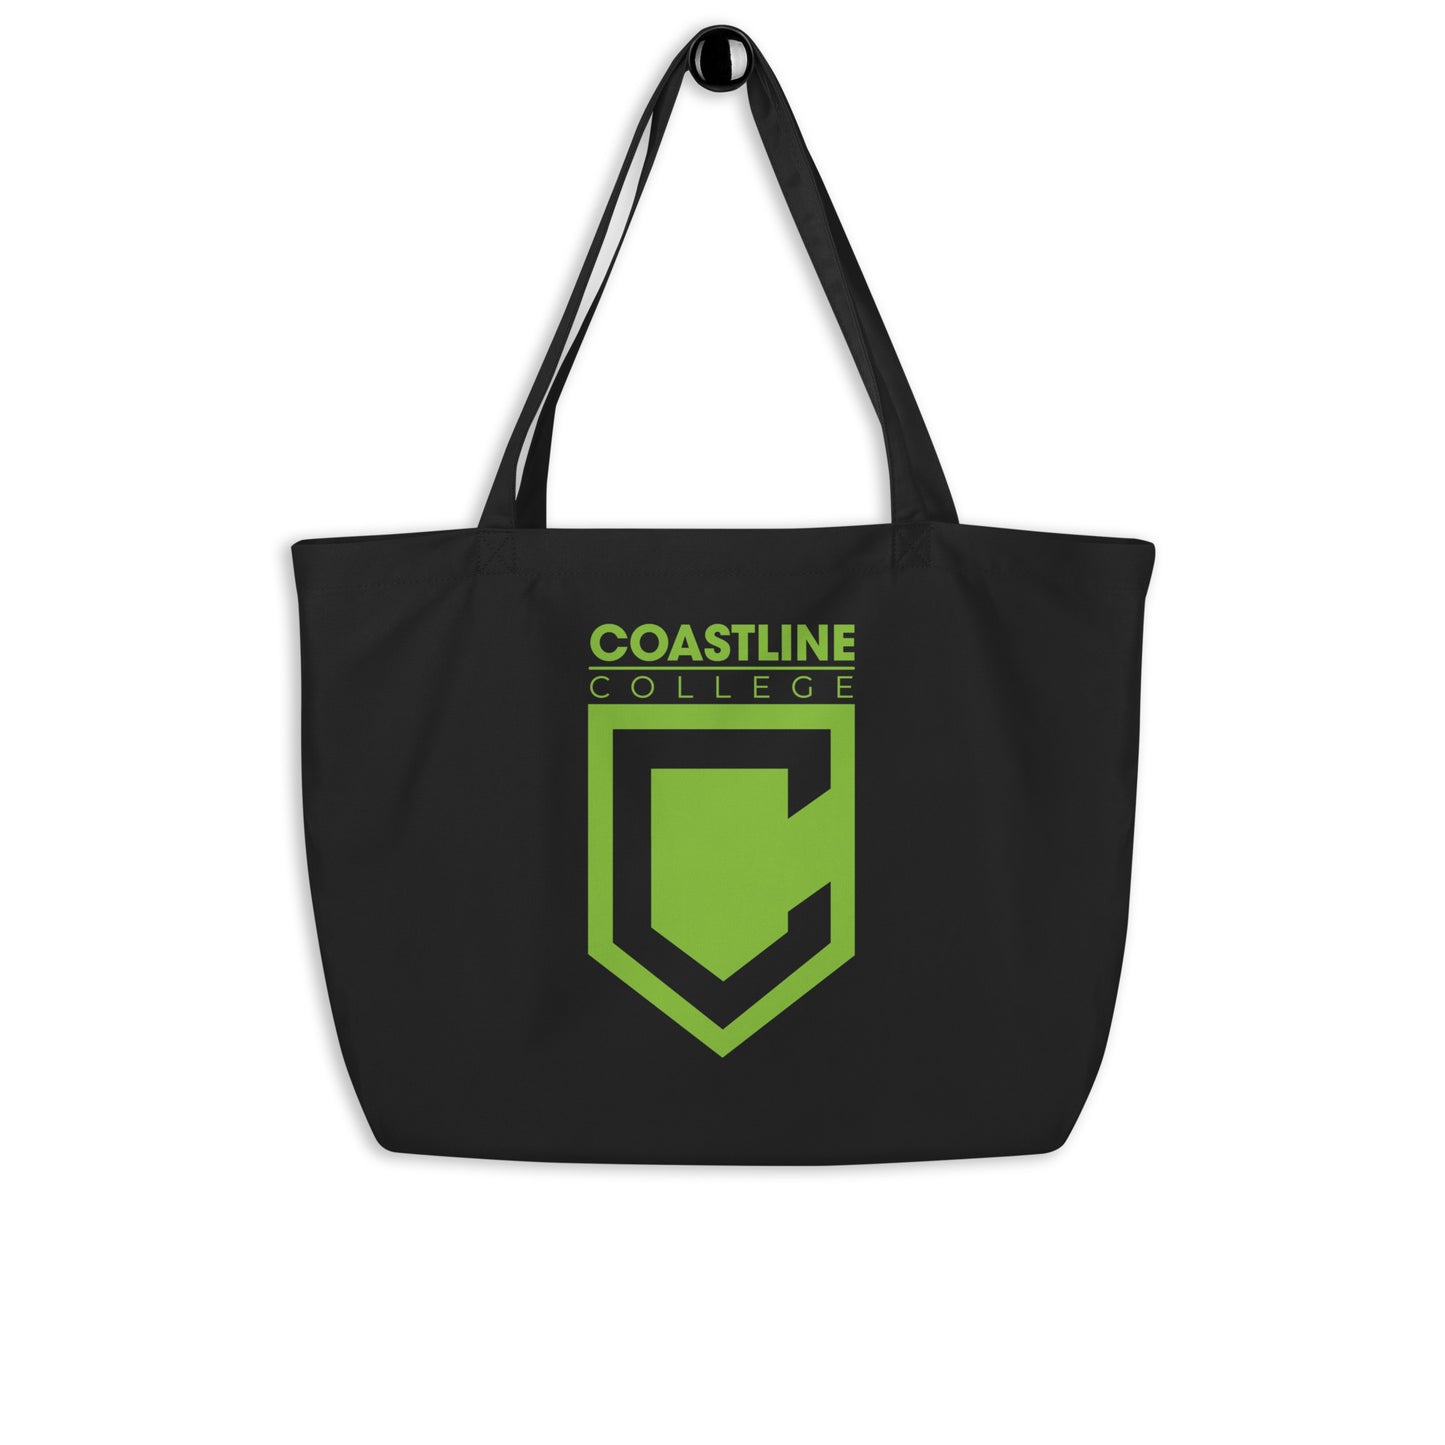 Coastline "Every Day is Earth Day" Large Organic Tote Bag (Black)